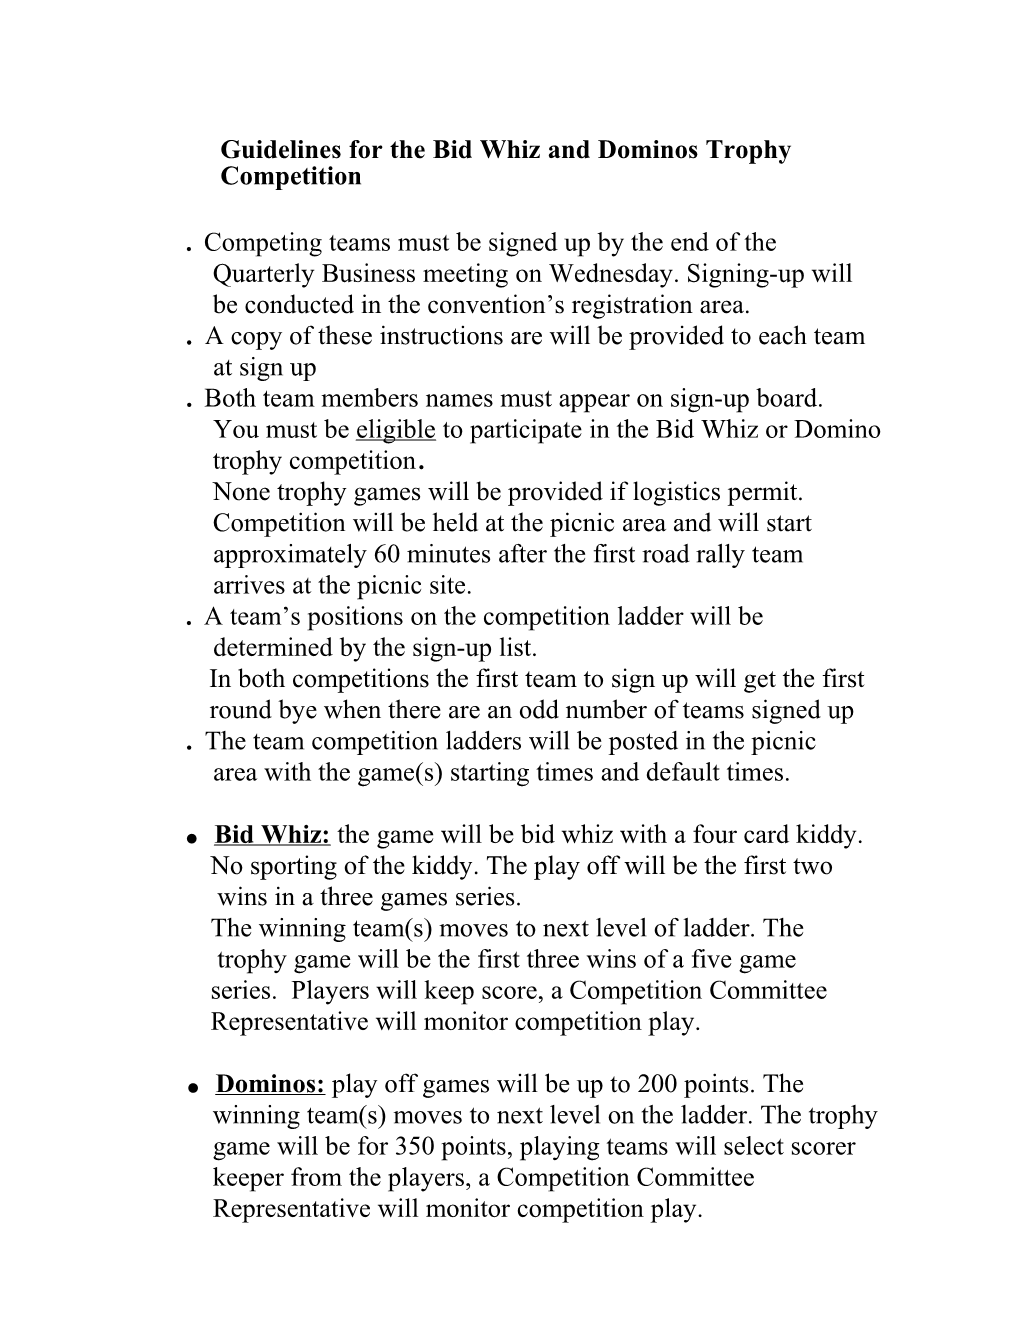 Guidelines for the Bid Whiz and Dominos Trophy Competition